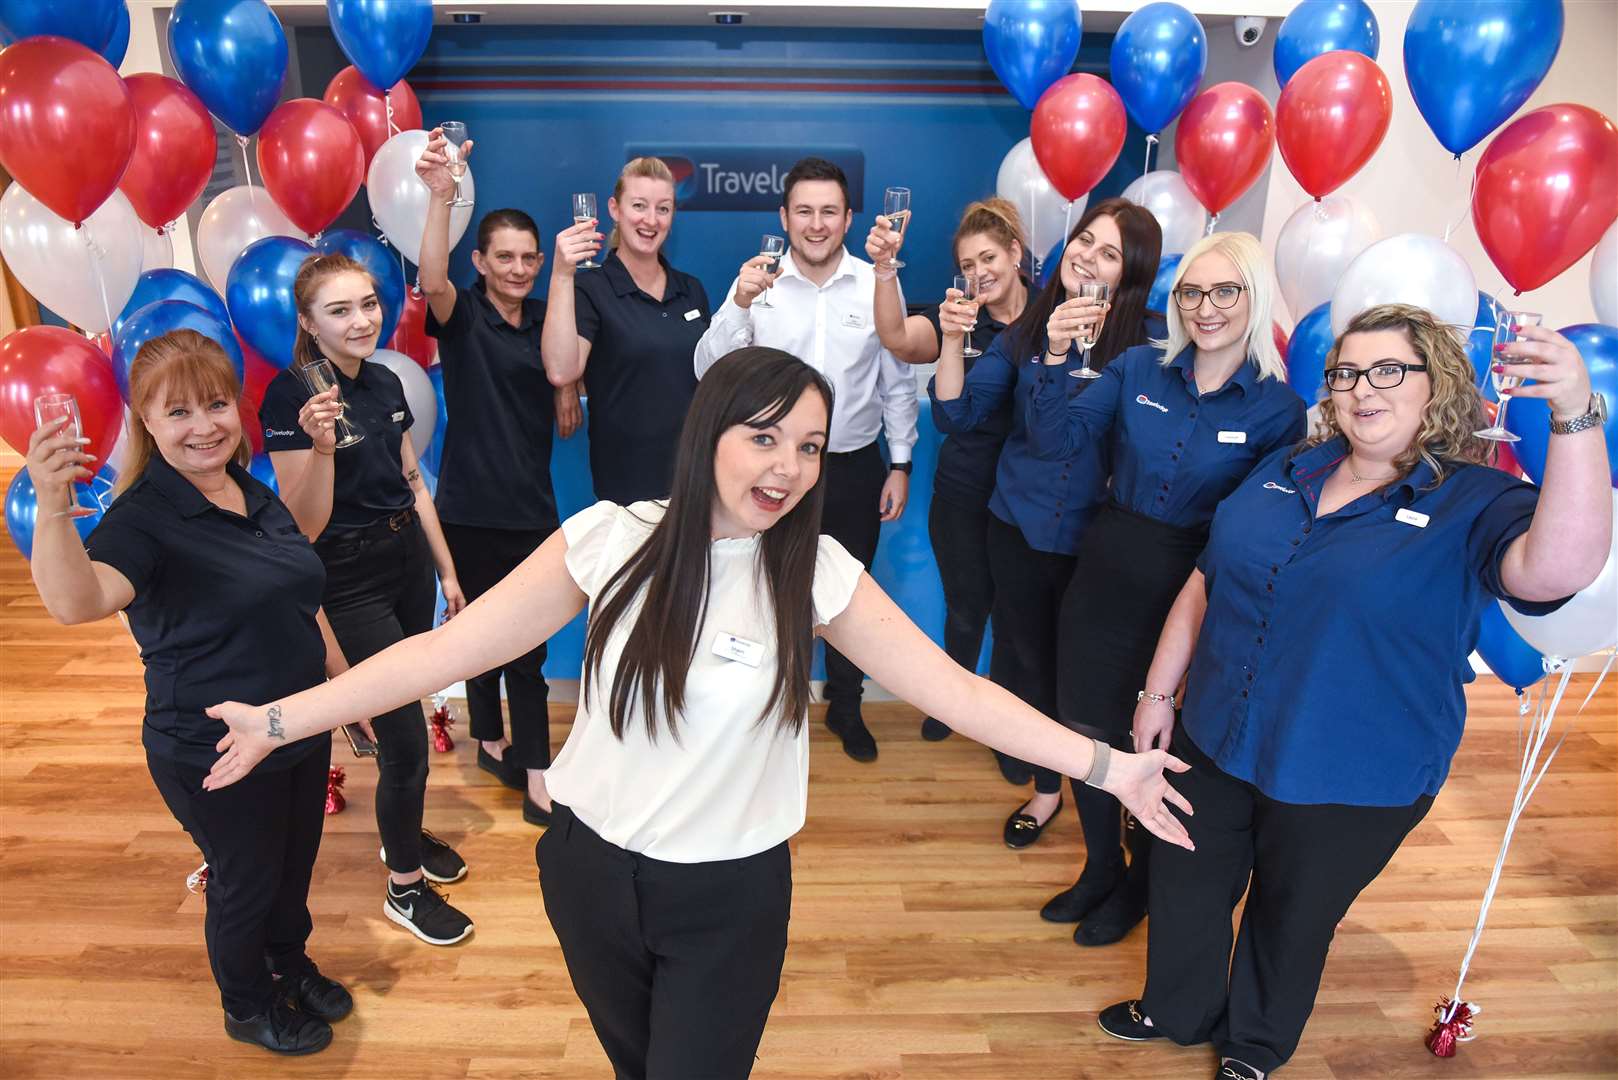 Manager Sharn Urand and her team at Rochester Travelodge. Picture: Emma Sheppard